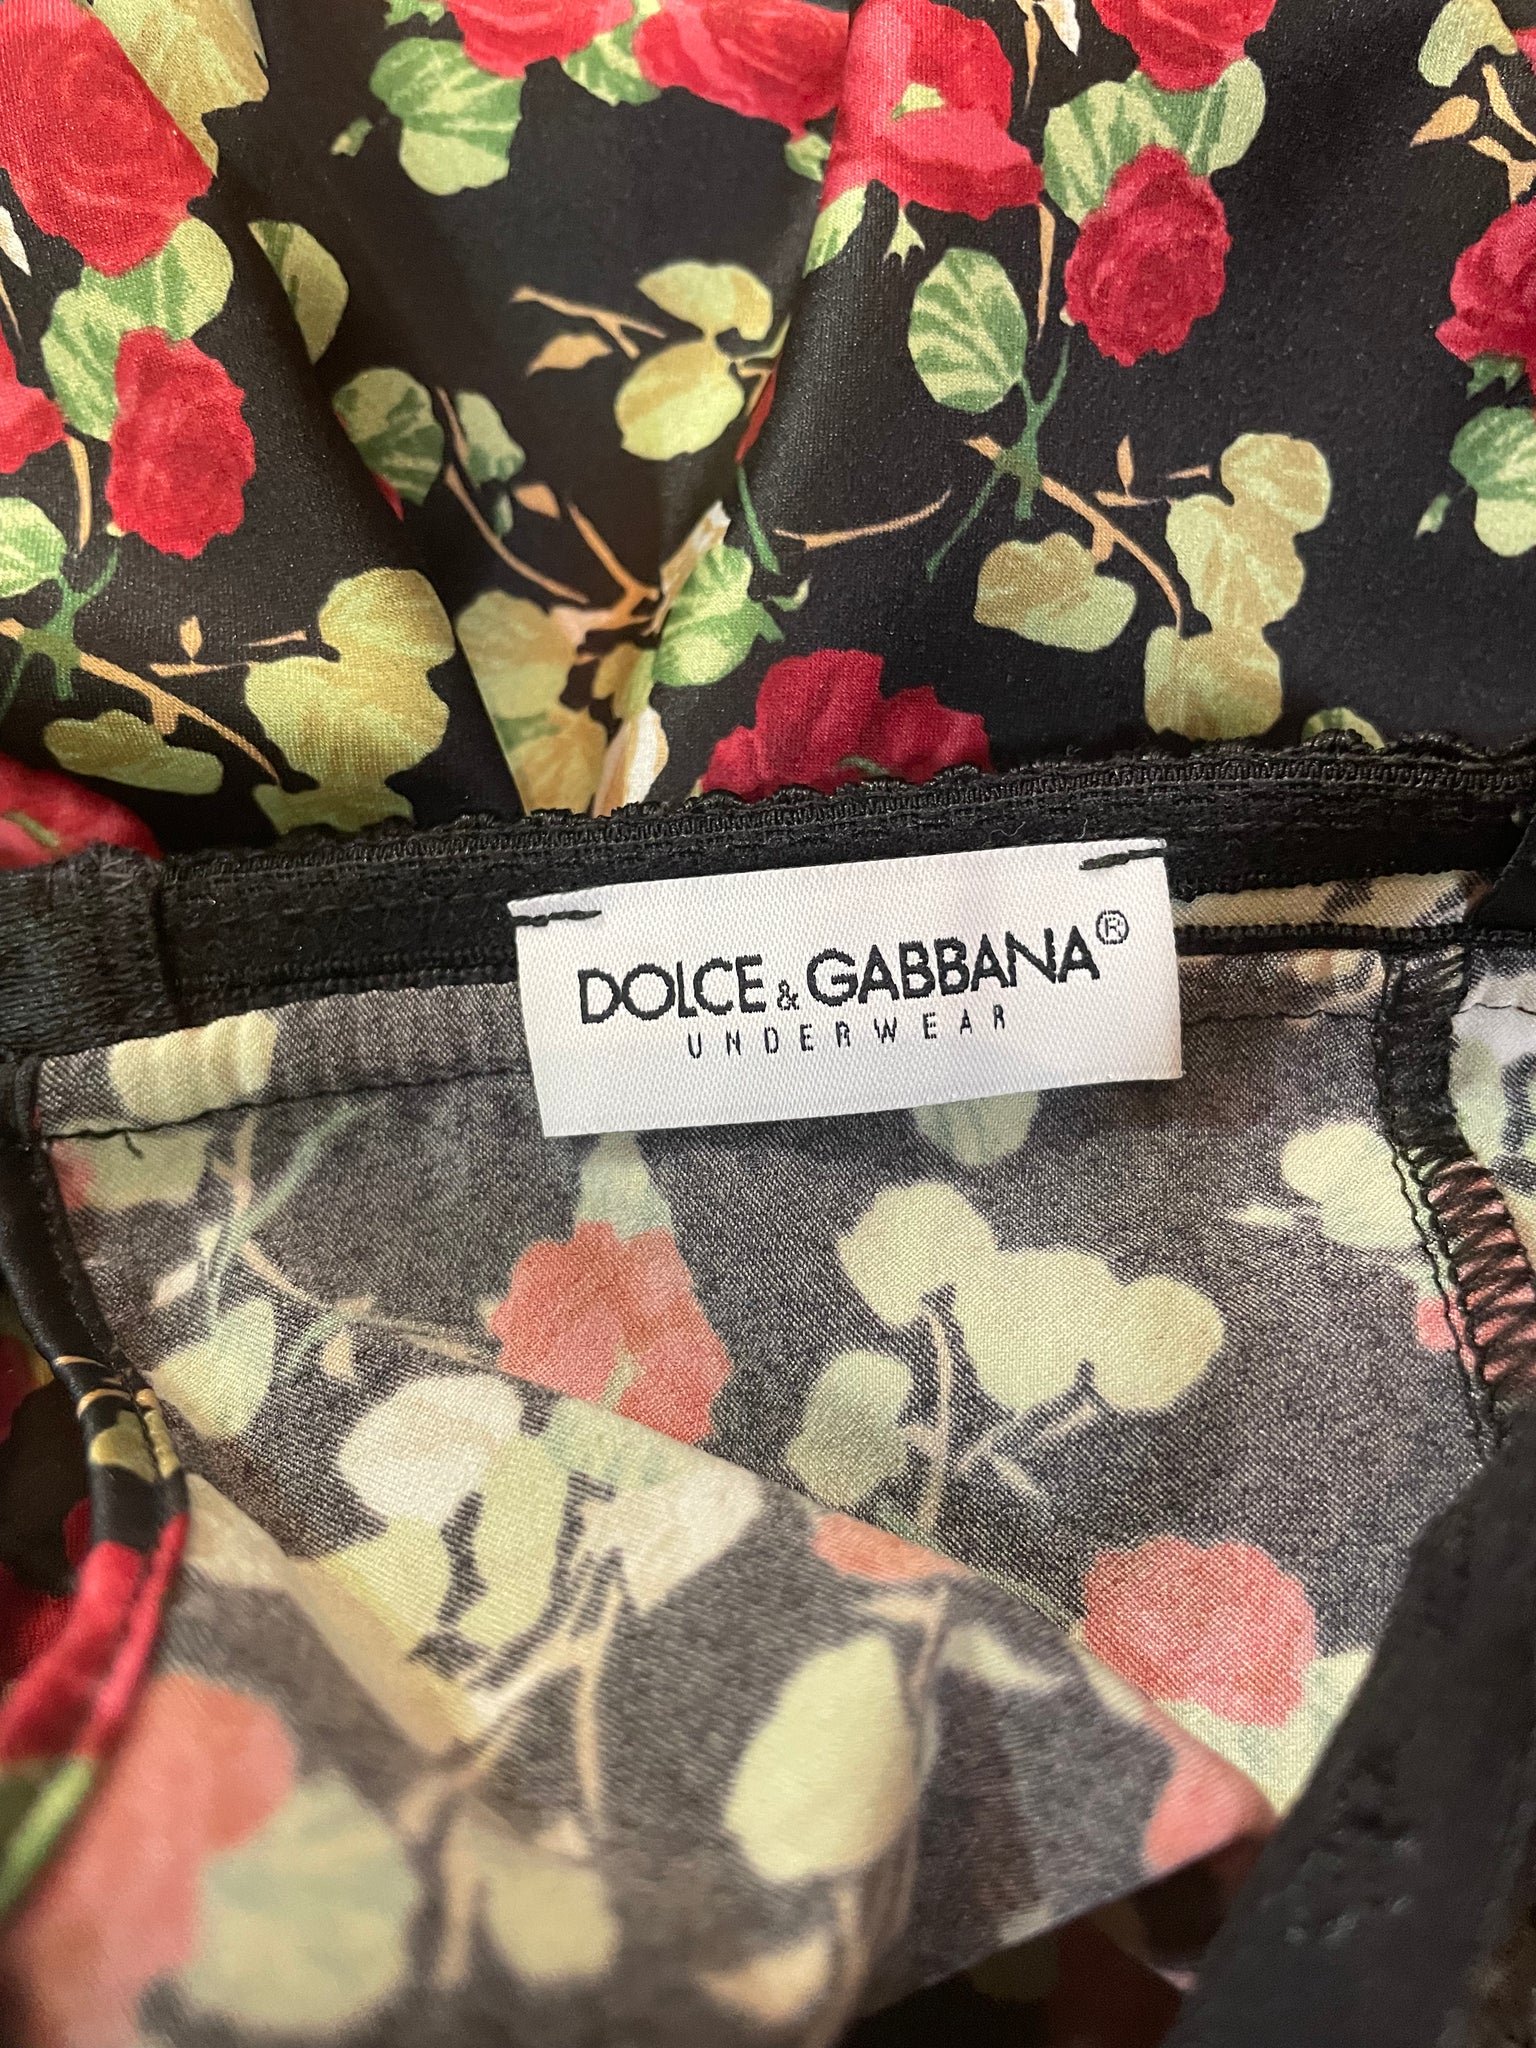 Dolce & Gabbana Y2K Rose Print Camisole with Black Lace Trim LABEL 4of 4